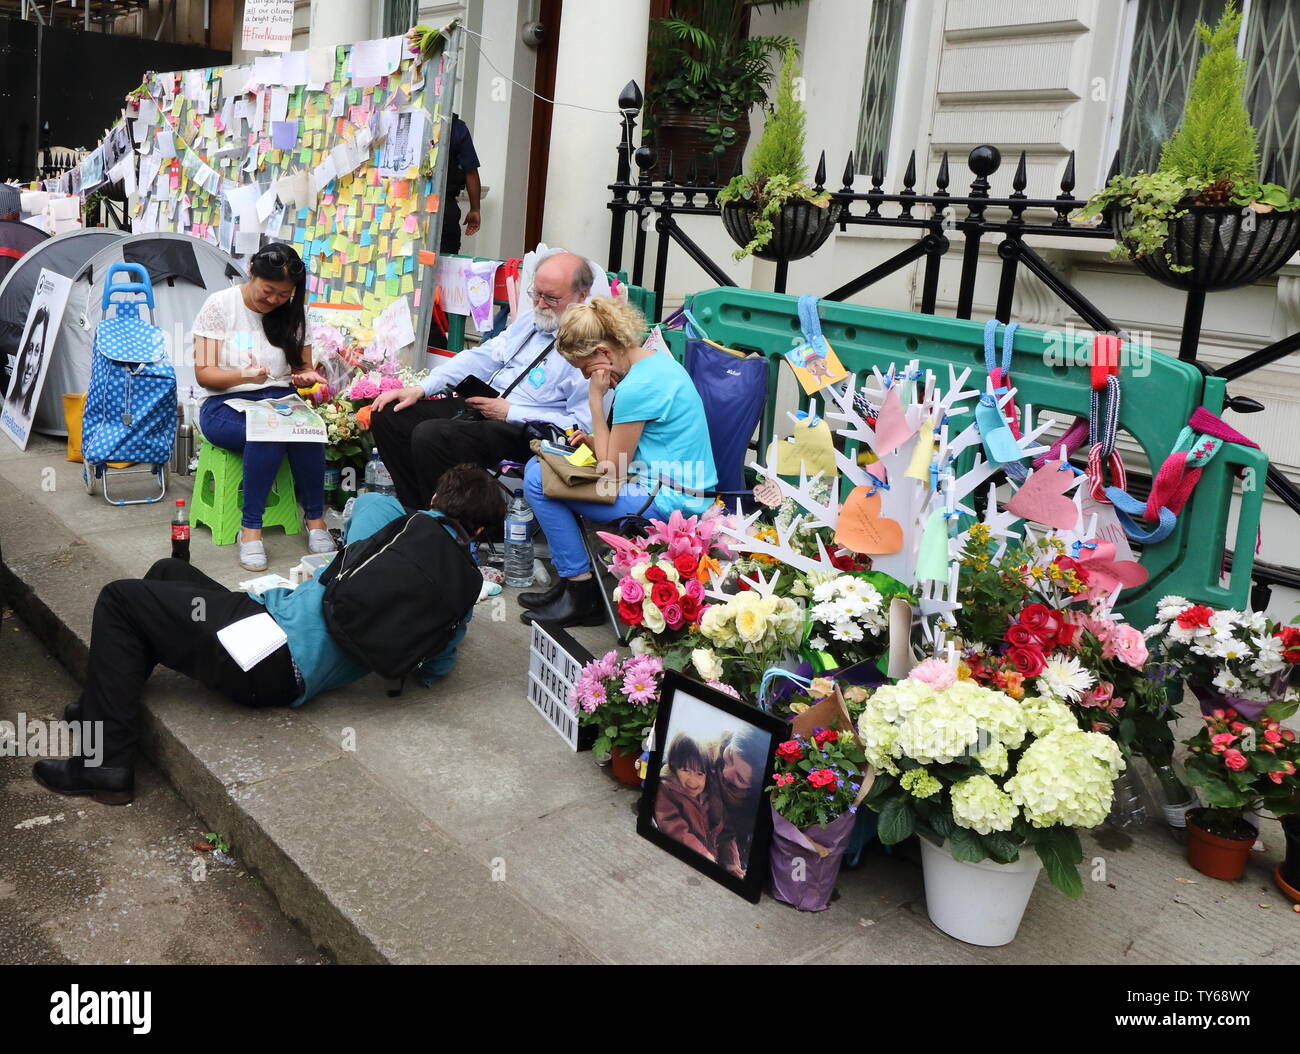 London, UK. 25th June, 2019. Supporters seen in front of the Iranian Embassy in support of Nazanin Zaghari-Ratcliffe. Husband of imprisoned Iranian-British national Nazanin Zaghari-Ratcliffe, Richard Ratcliffe, now on the 11th day of a hunger strike outside the Iranian Embassy in London. He is acting in solidarity with his wife, who is also refusing to eat in protest at her own unfair imprisonment in Iran on spying charges. Credit: SOPA Images Limited/Alamy Live News Stock Photo